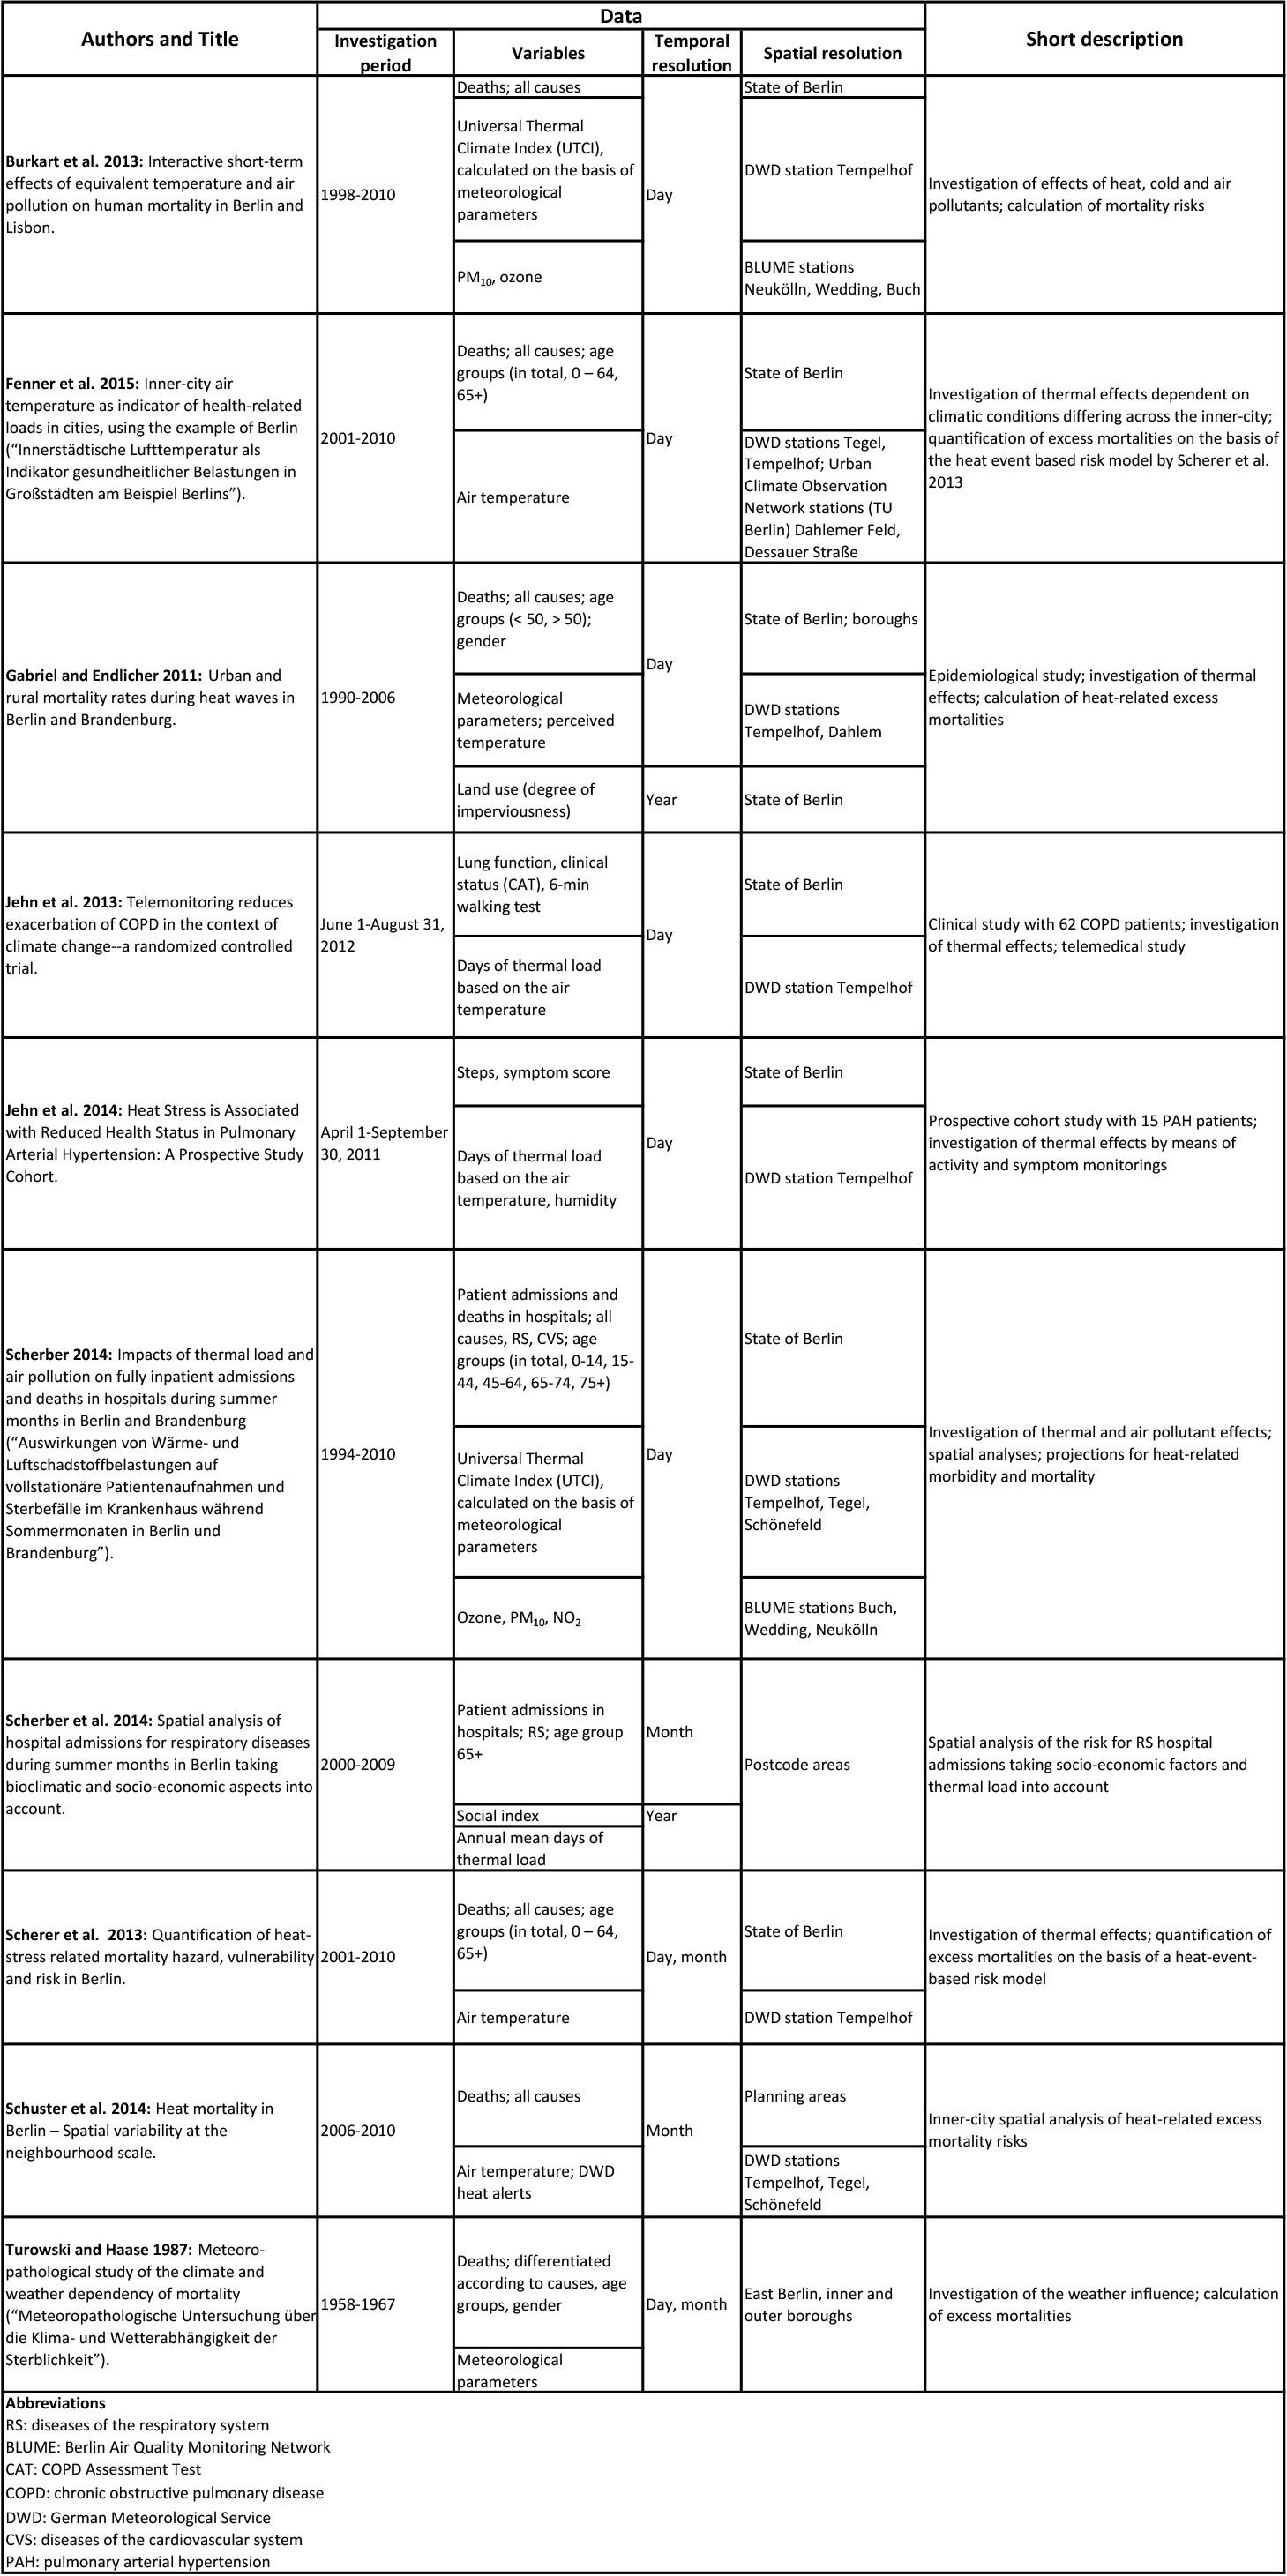 Enlarge photo: Table 3: Overview table of studies investigating the impacts of thermal load and air pollution on health in Berlin (as of 2015, sample)